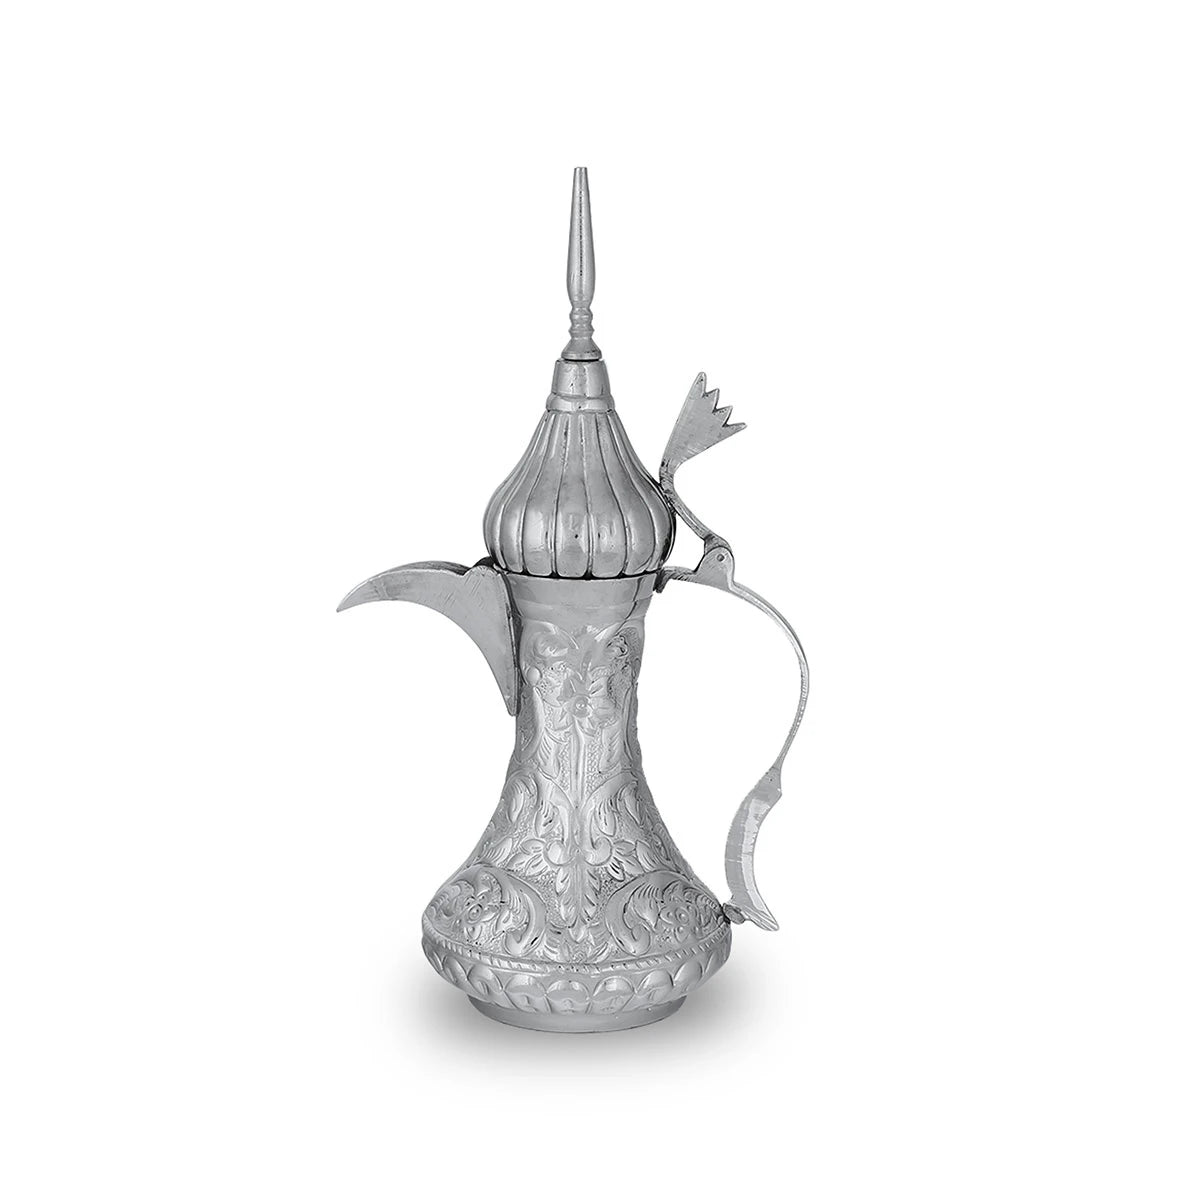 Sculpted Nickel Middle Eastern Aftaba / Dallah Coffee Pot